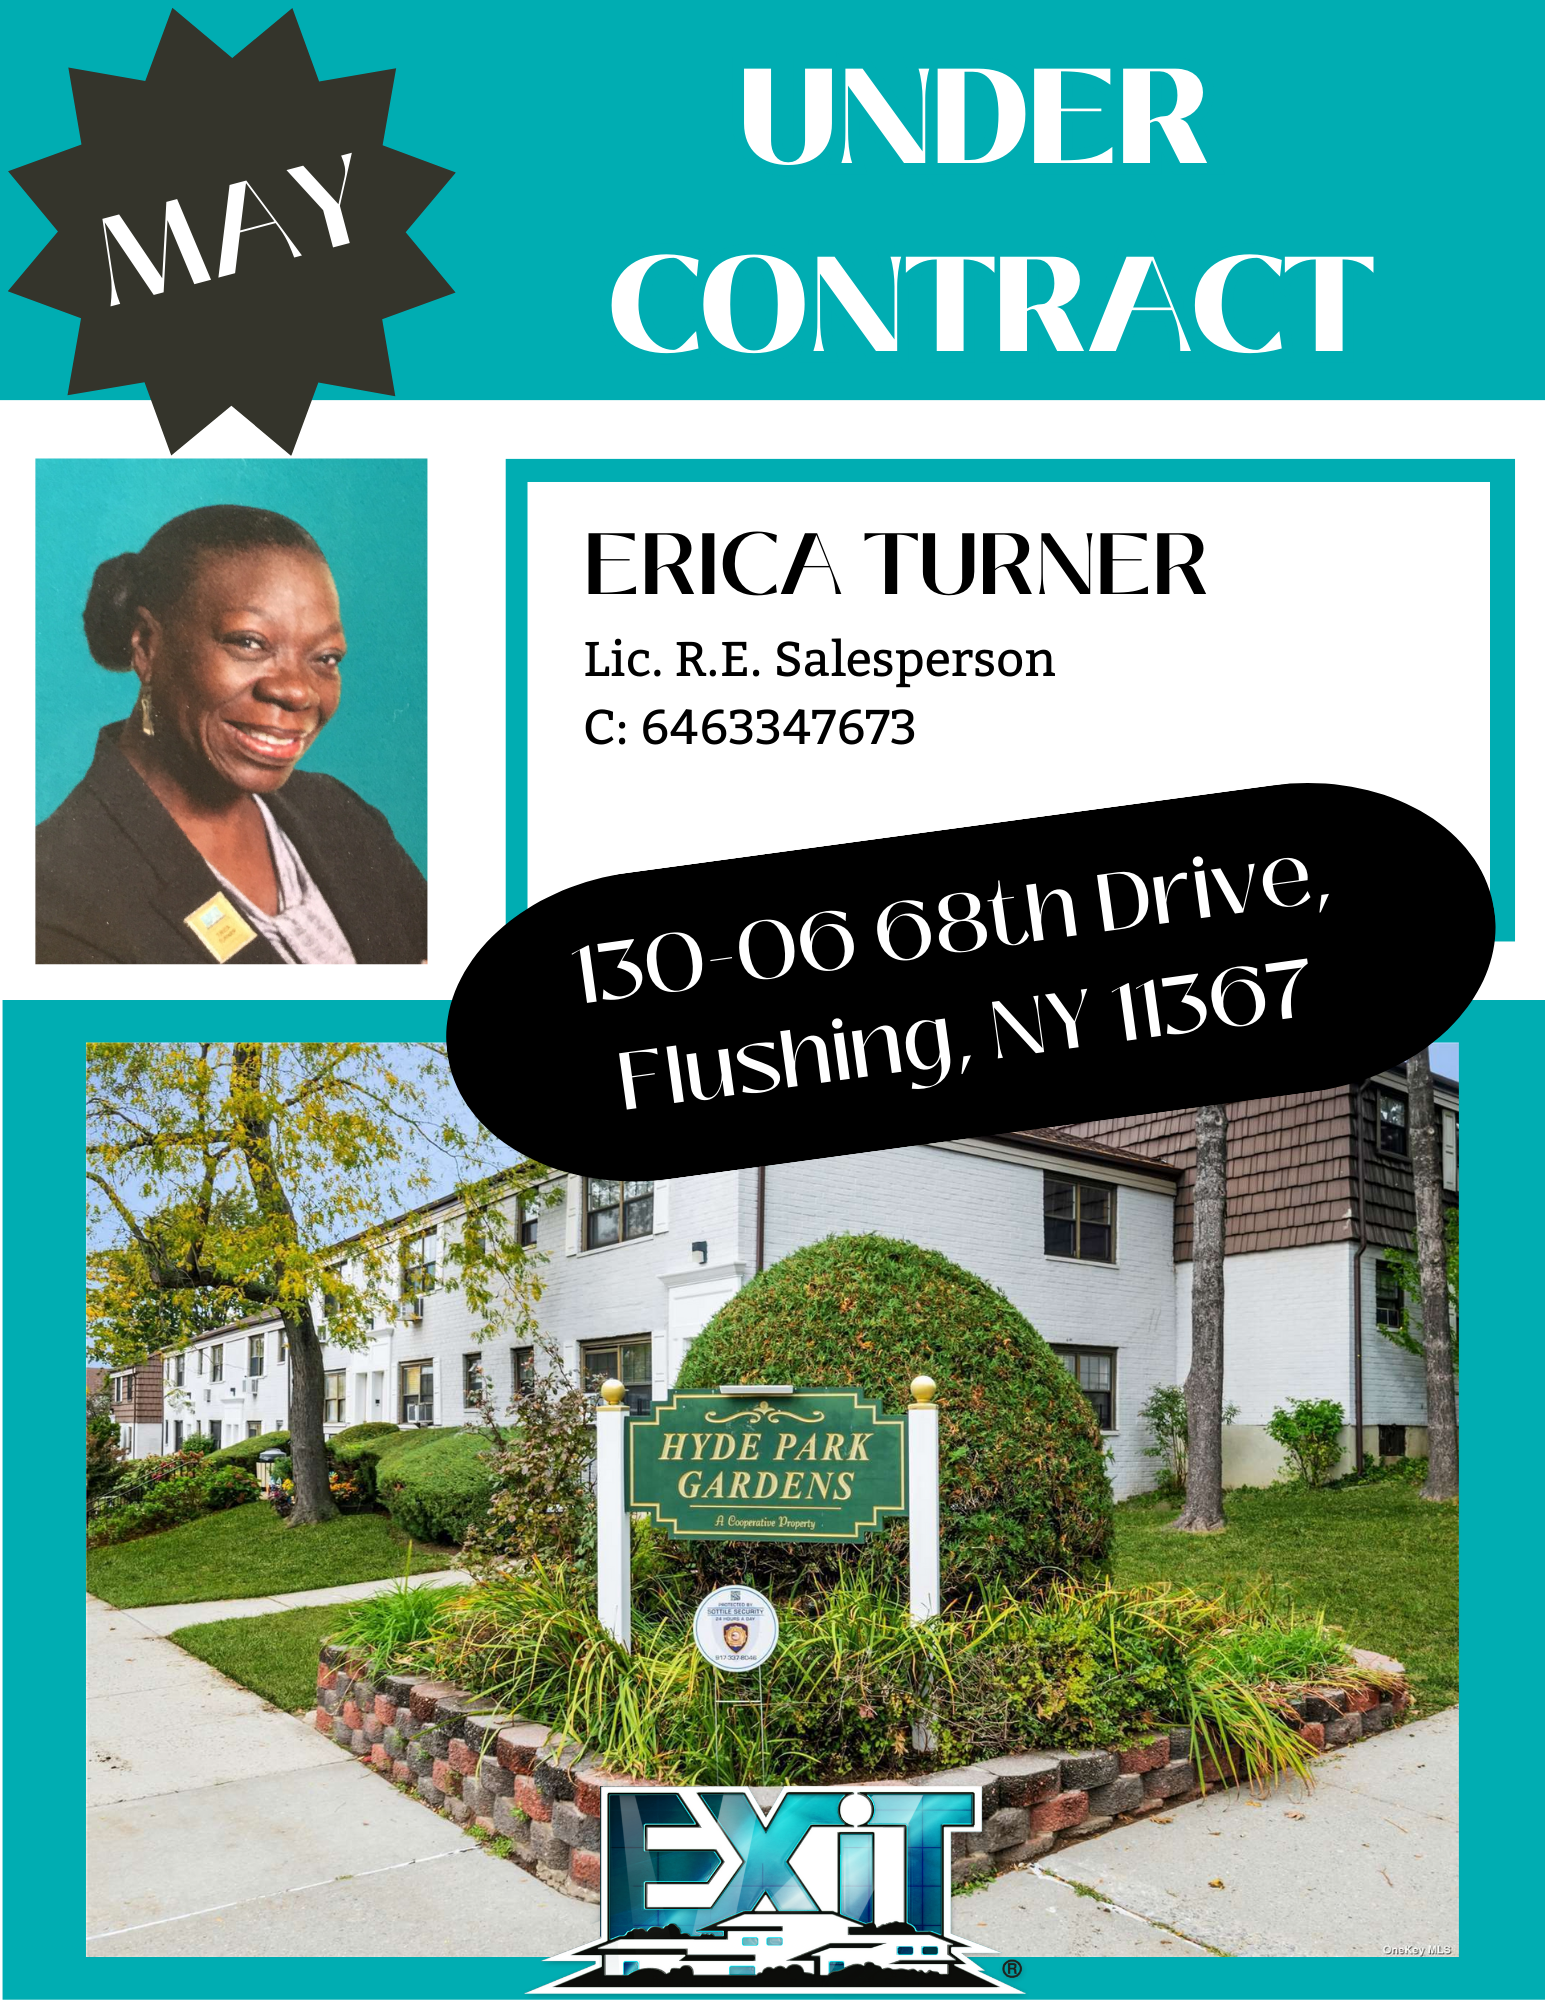 Under Contract by Erica Turner